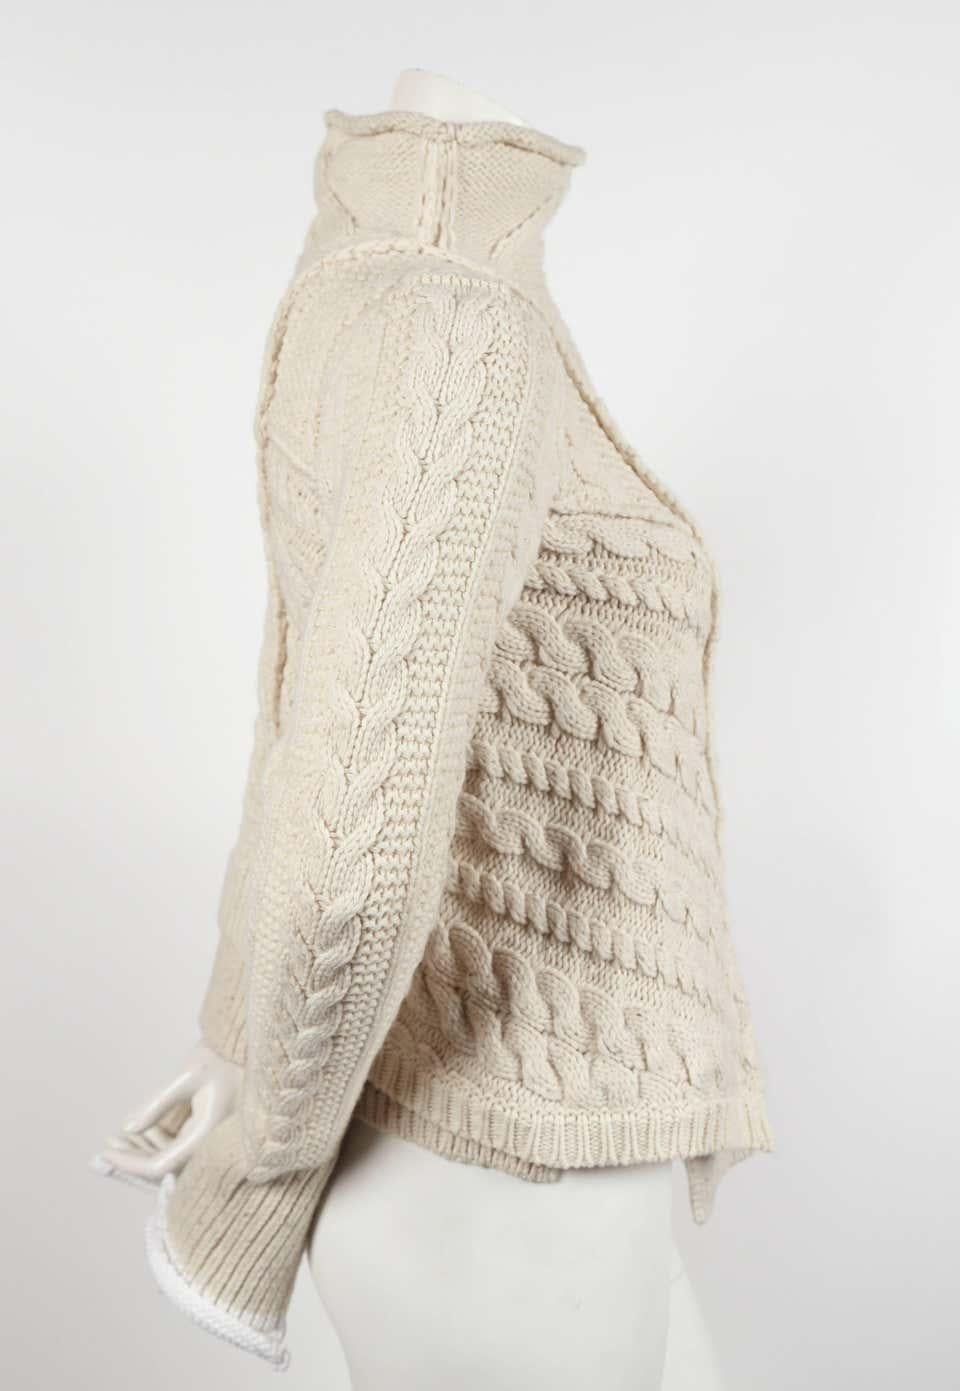 Very rare cream cable knit sweater with asymmetric hemline designed by Phoebe Philo for Celine dating to pre-Fall of 2011. Labeled a size 'M'. Fits a size small. Approximate measurements (unstretched): shoulder 14.5